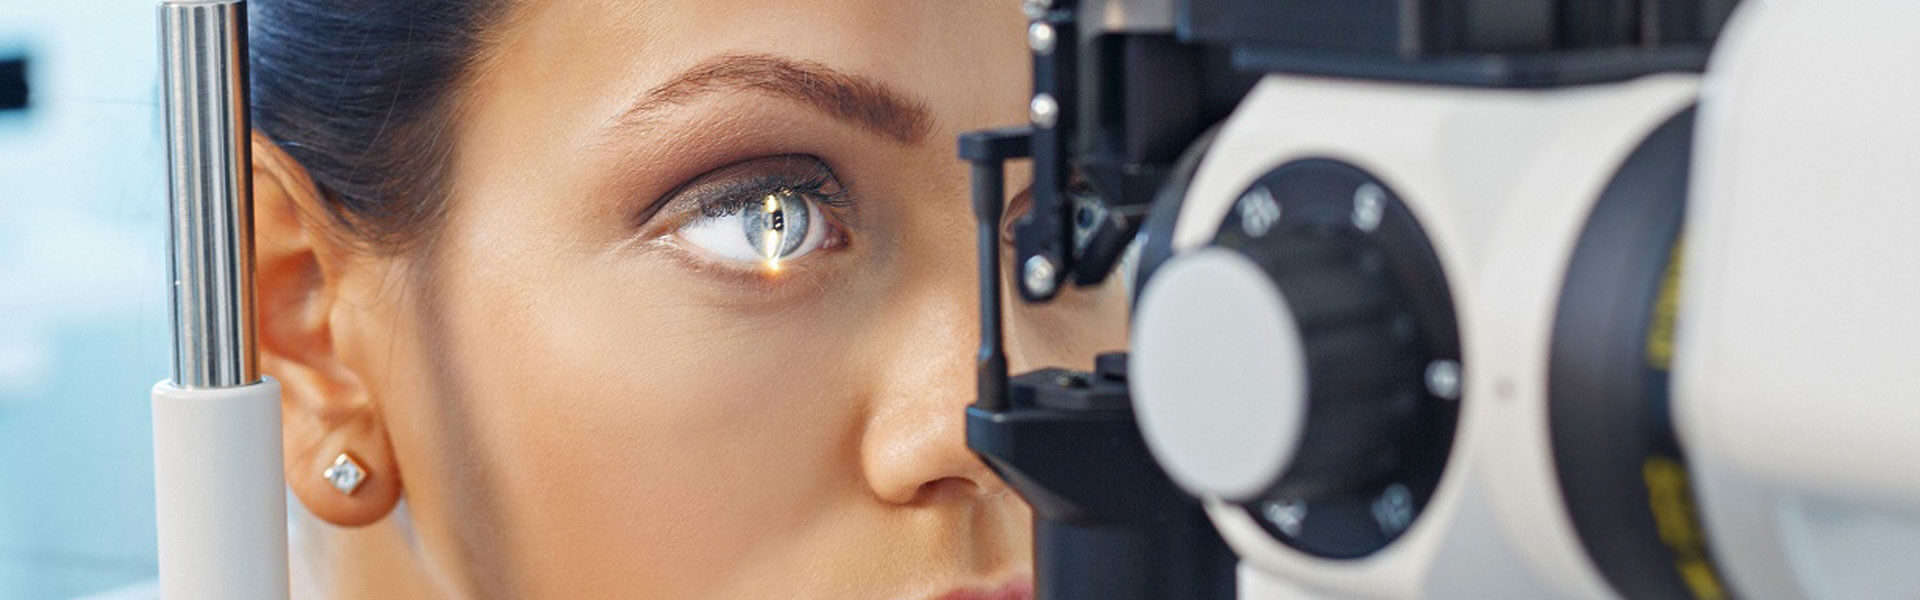 Ophthalmologist Telephone Answering Service and Automated Telemessage Call Center - BIG Messages